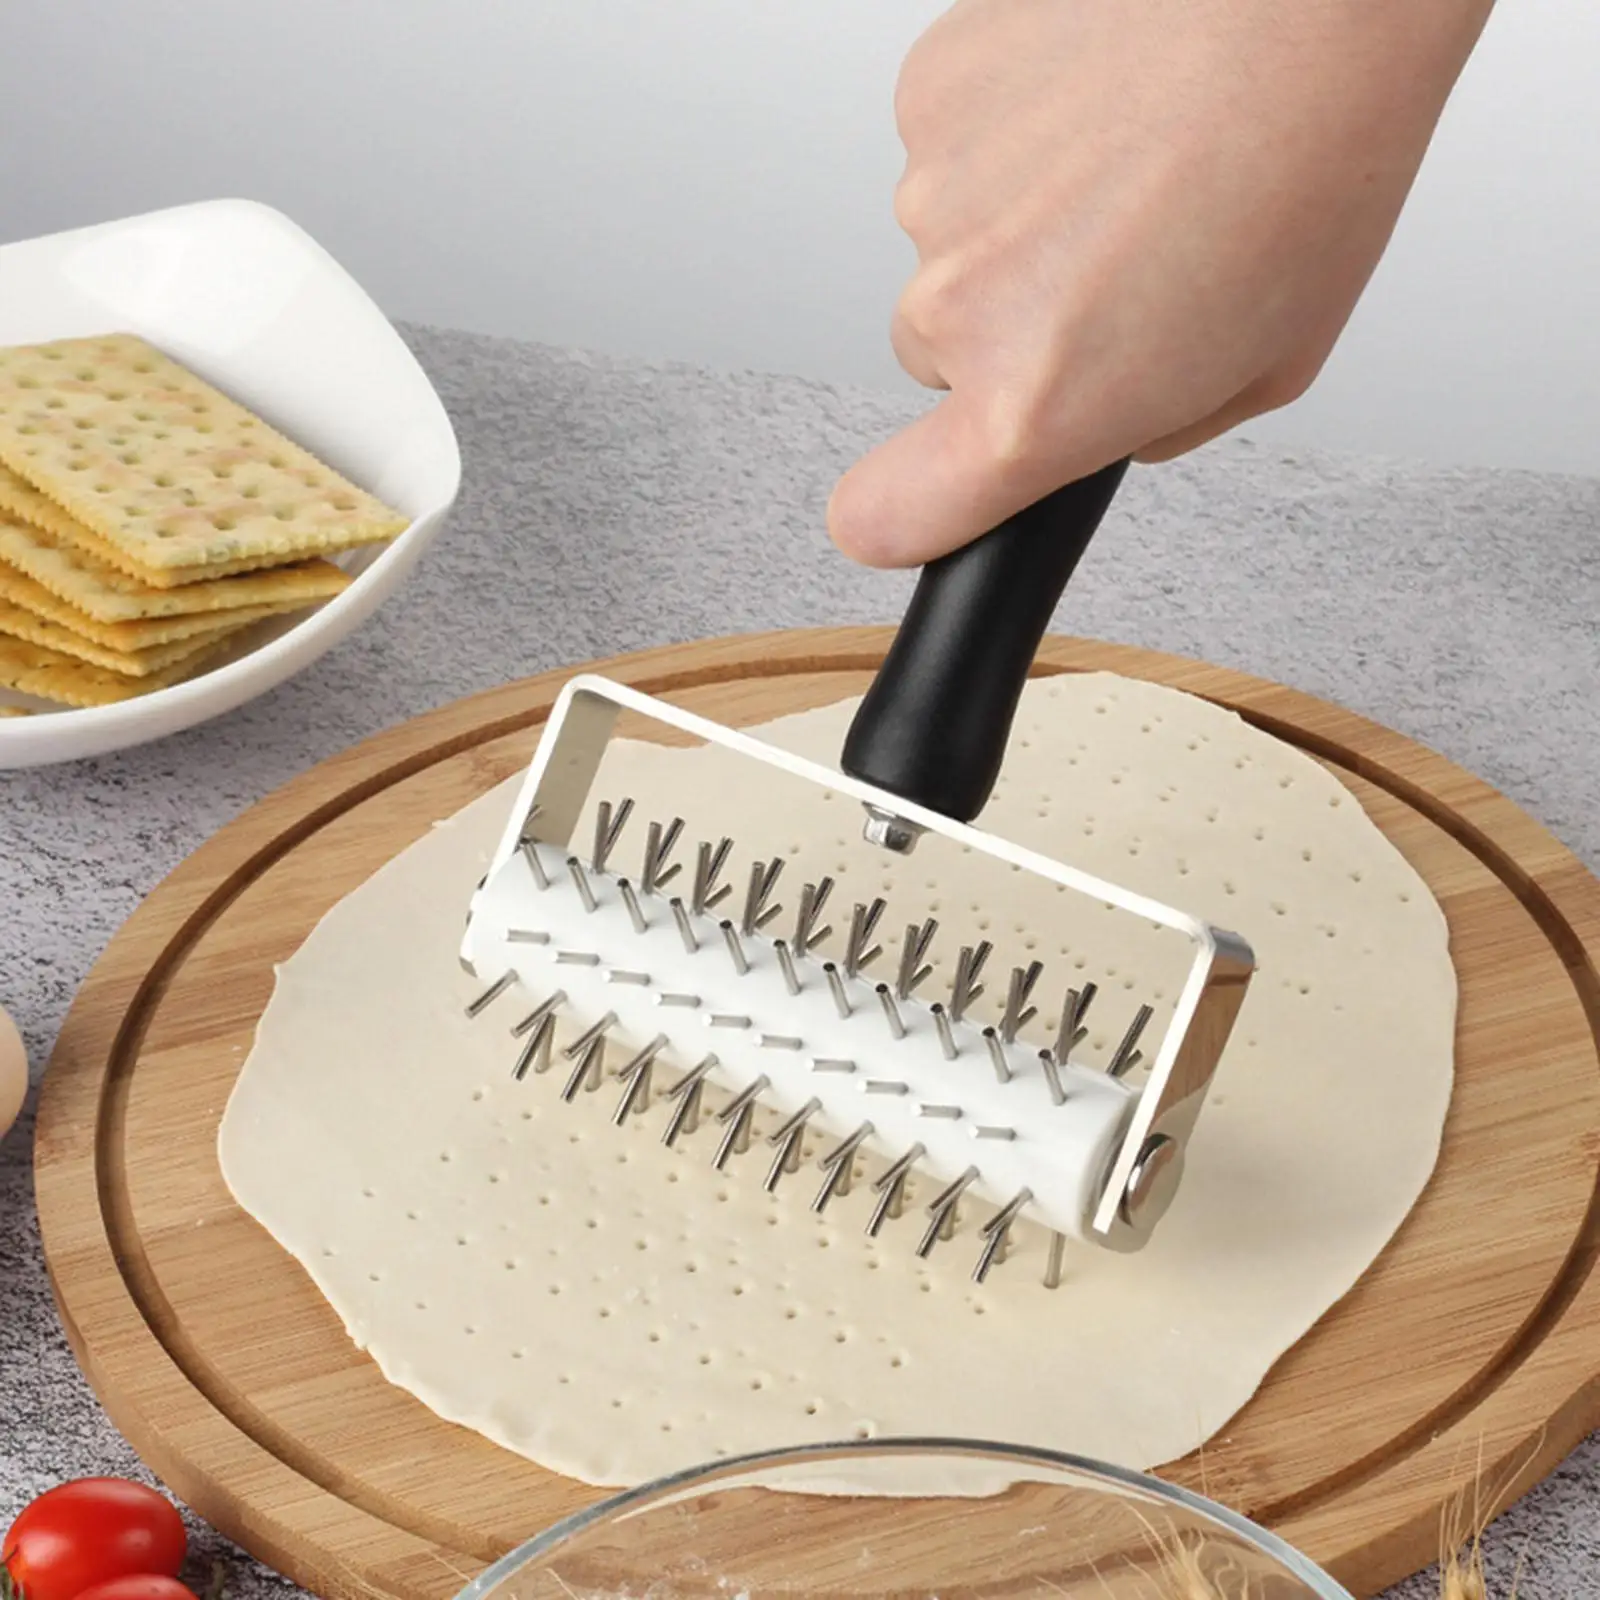 Pizza Roller Pin Stainless Steel Hole Puncher with PP Handle Pie Crust Pastry maker for Kitchen Baking Tool